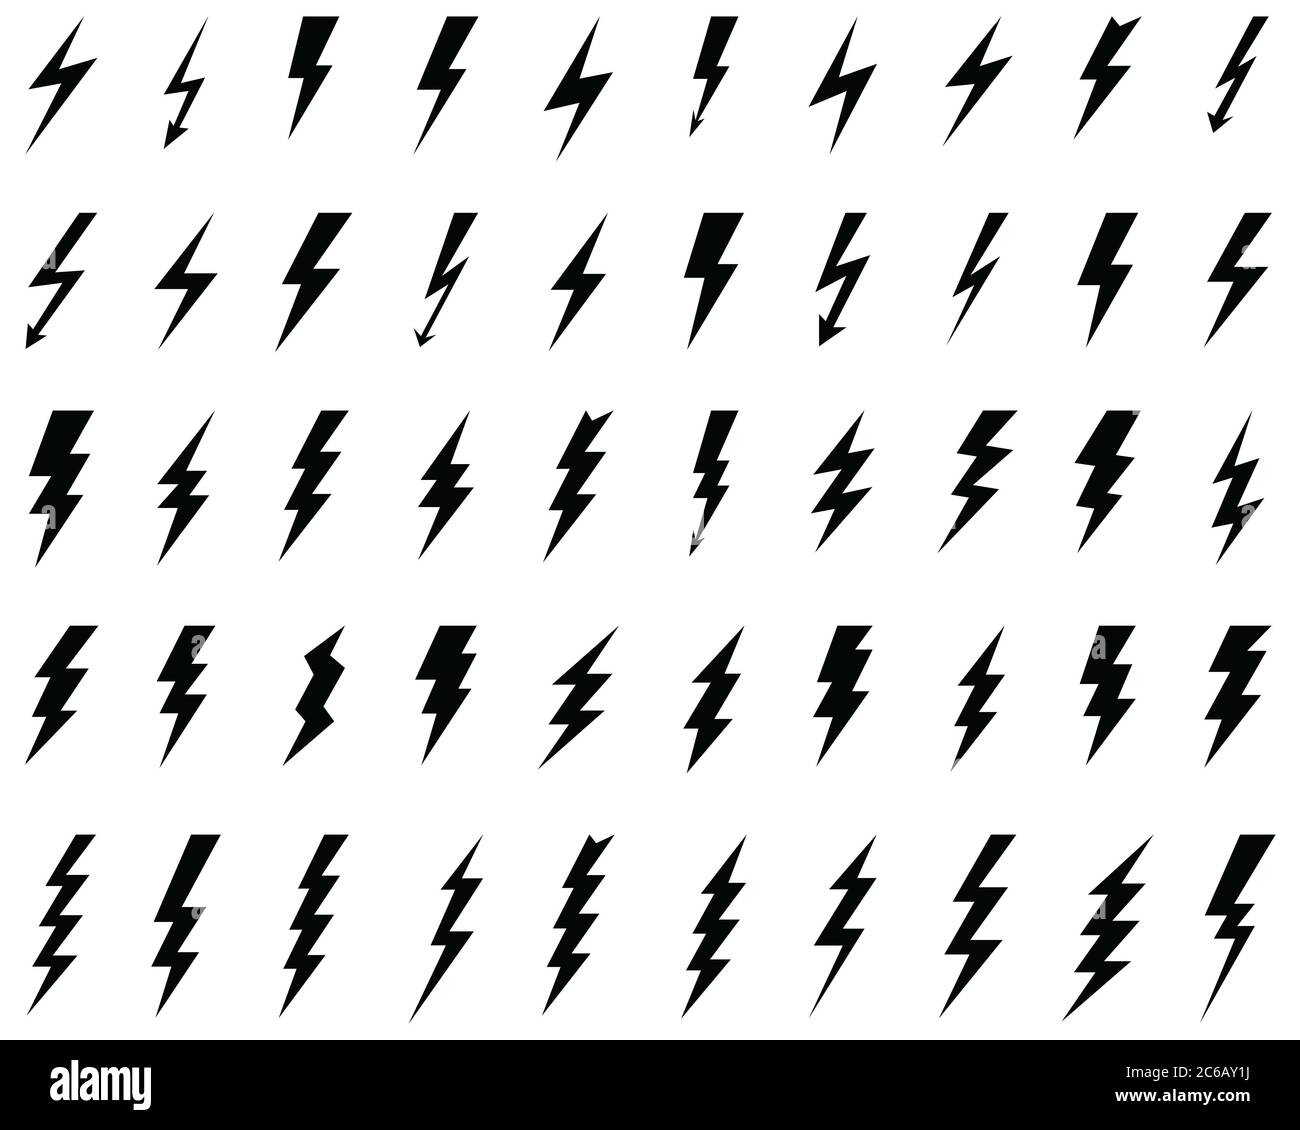 Black icons of thunder and flash lighting on a white background Stock Photo